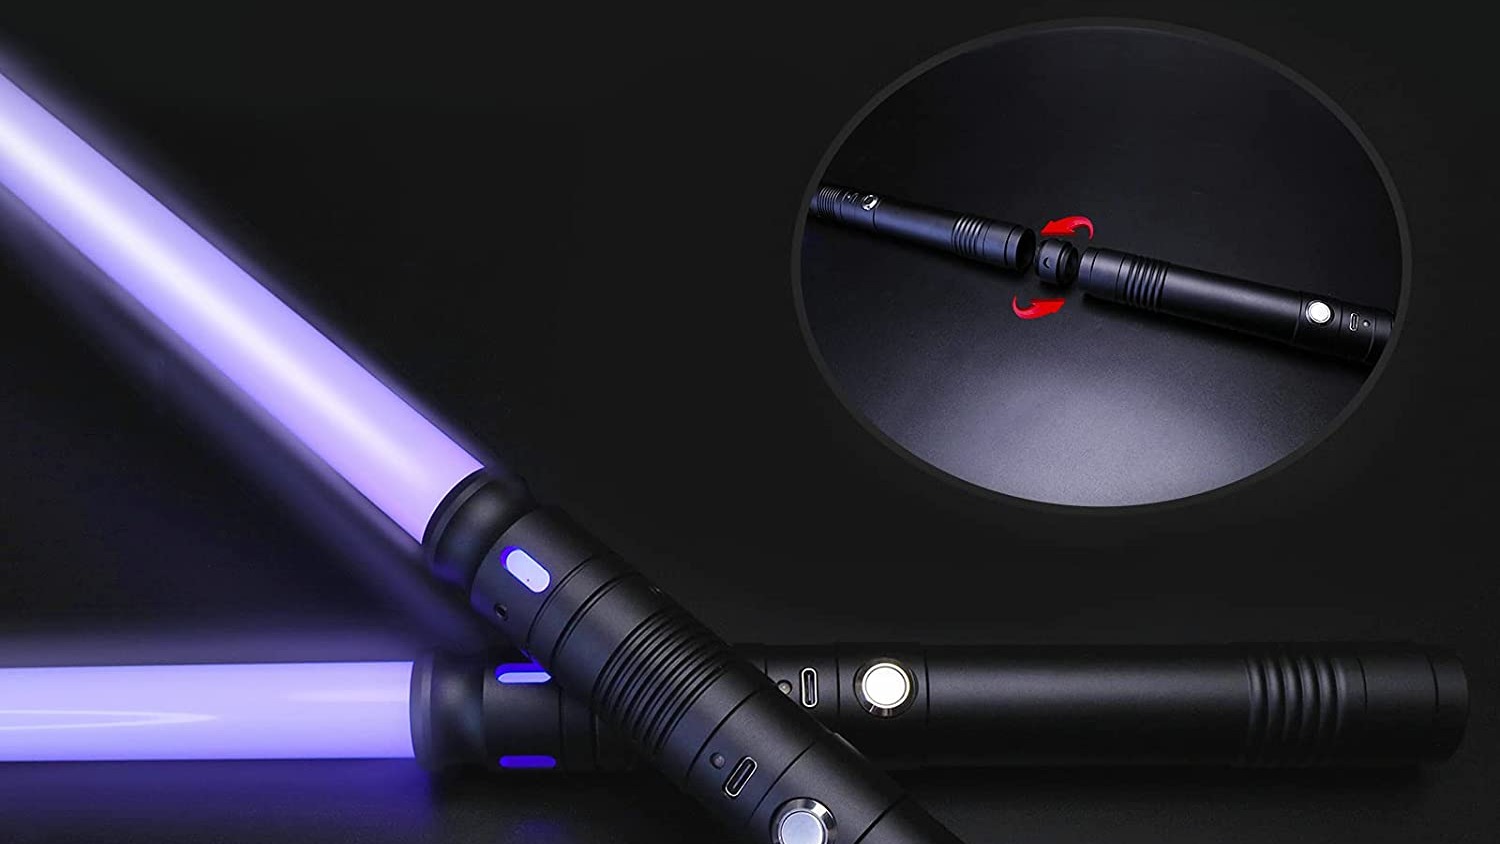 Gift the Force! Save up to 72% on Star Wars lightsaber gifts for your Jedi